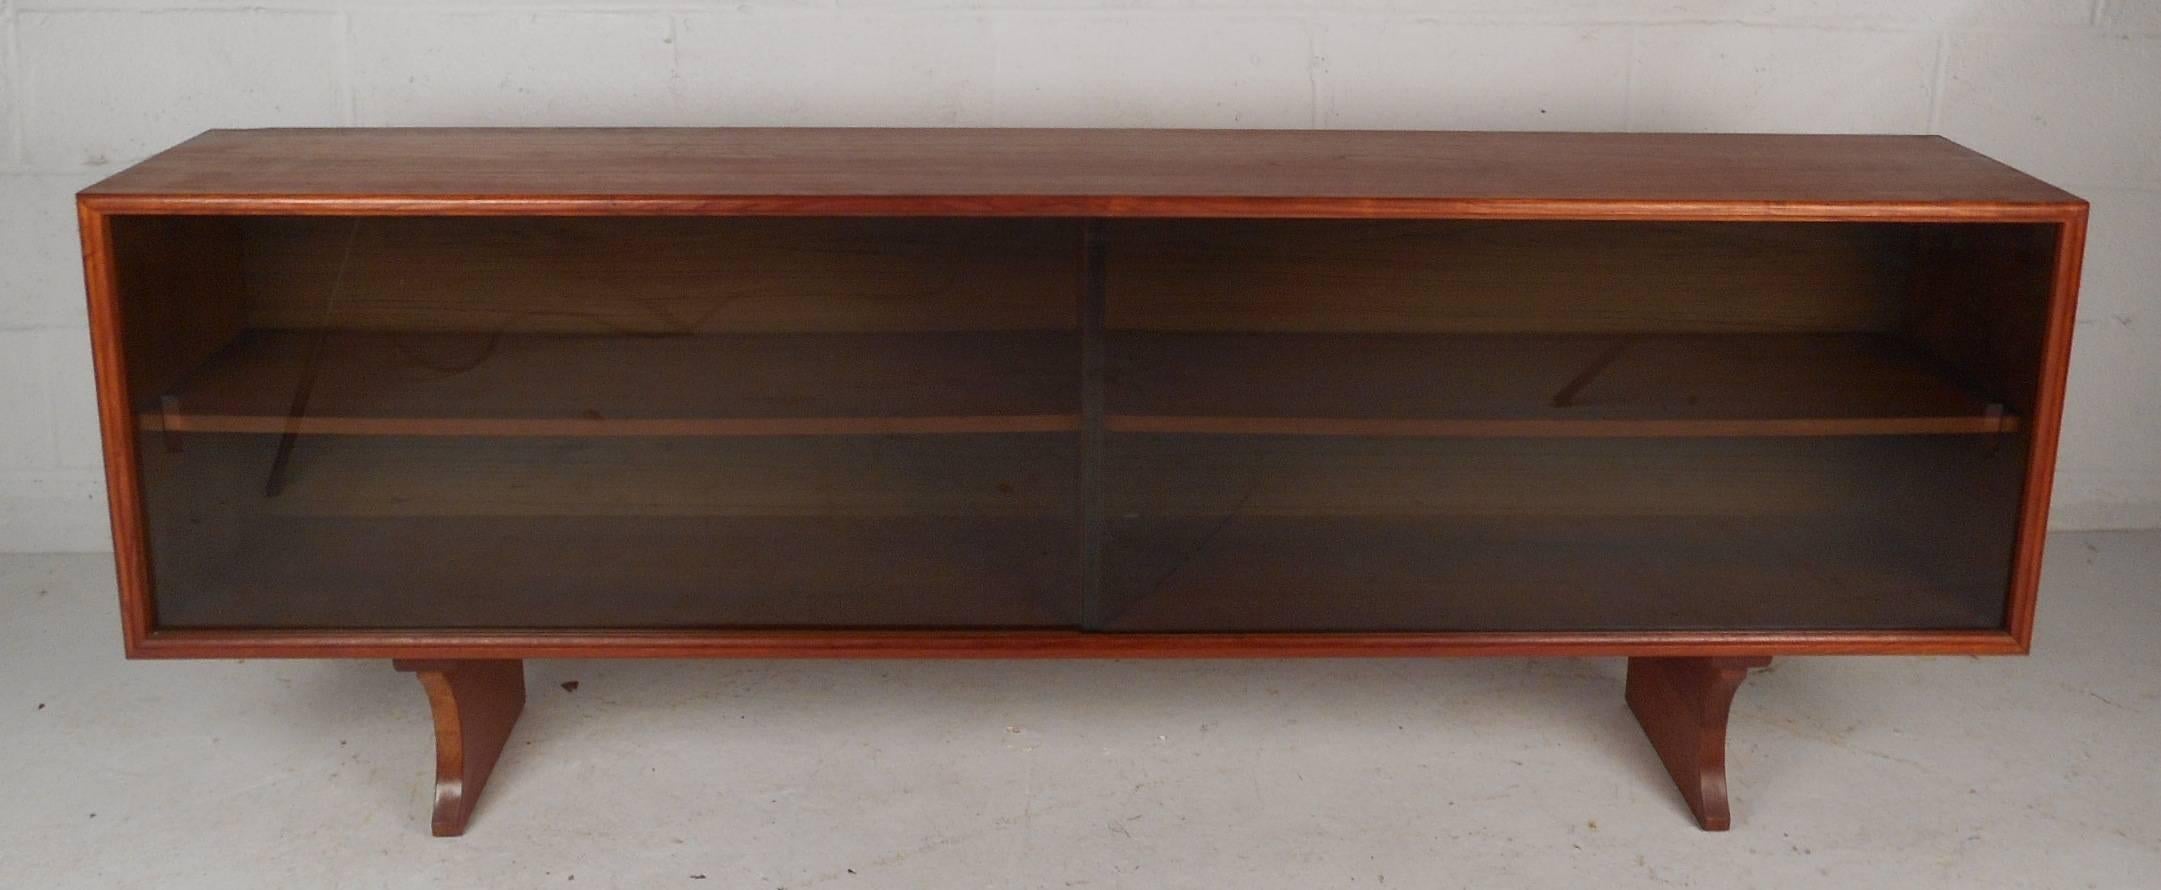 Stunning vintage modern long cabinet with smoked glass sliding doors makes the perfect addition to any modern interior. This versatile Mid-Century piece can be placed on top of a sideboard or set on the floor. This lovely case piece has two large